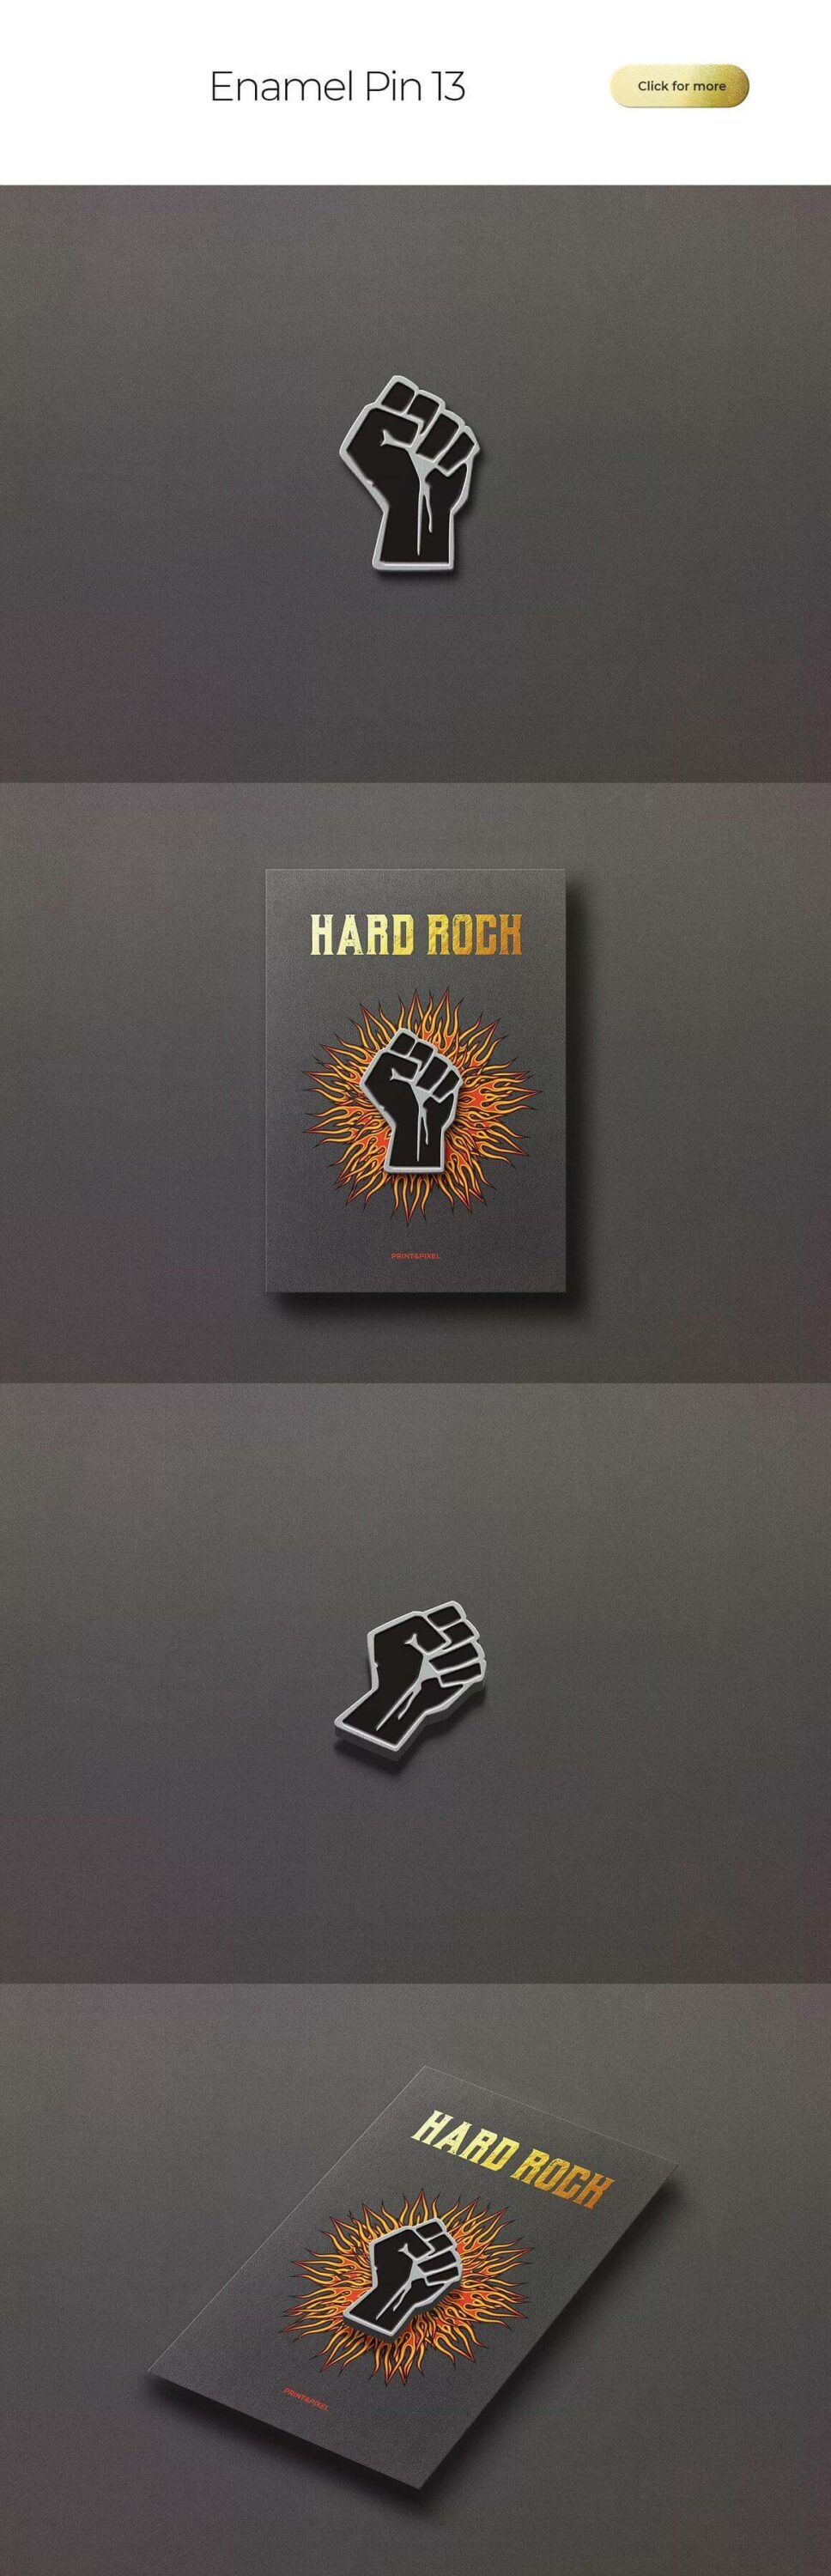 The image of a clenched hand and the inscription hard rock on a gray background.